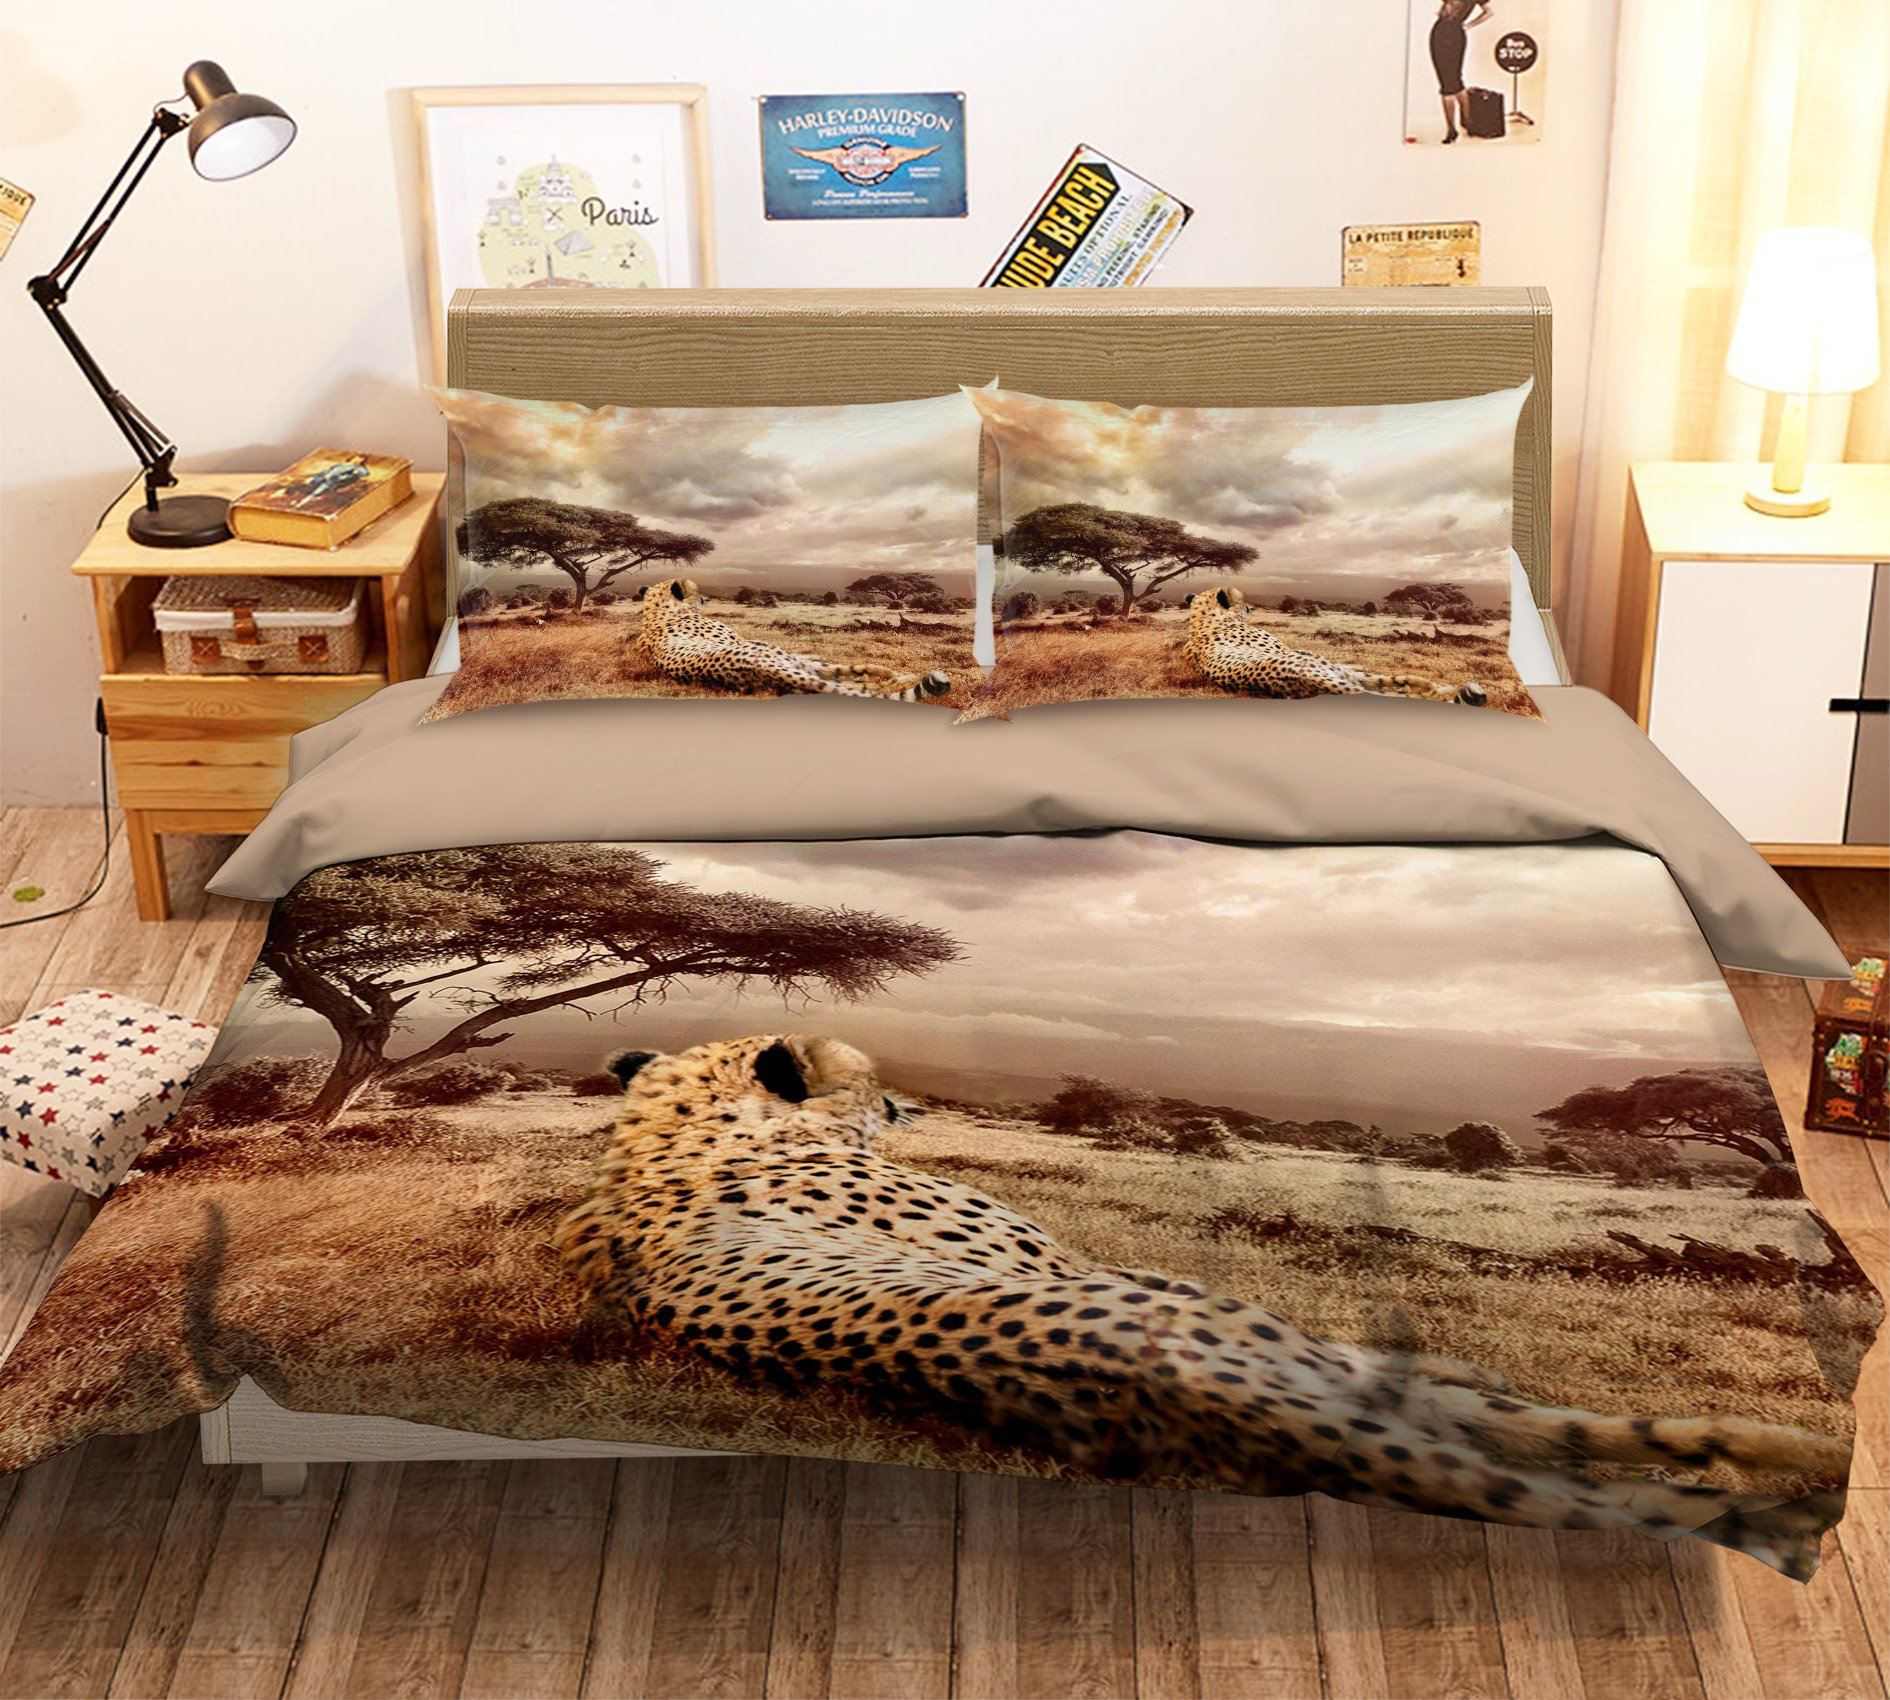 3D African Leopard 1925 Bed Pillowcases Quilt Quiet Covers AJ Creativity Home 